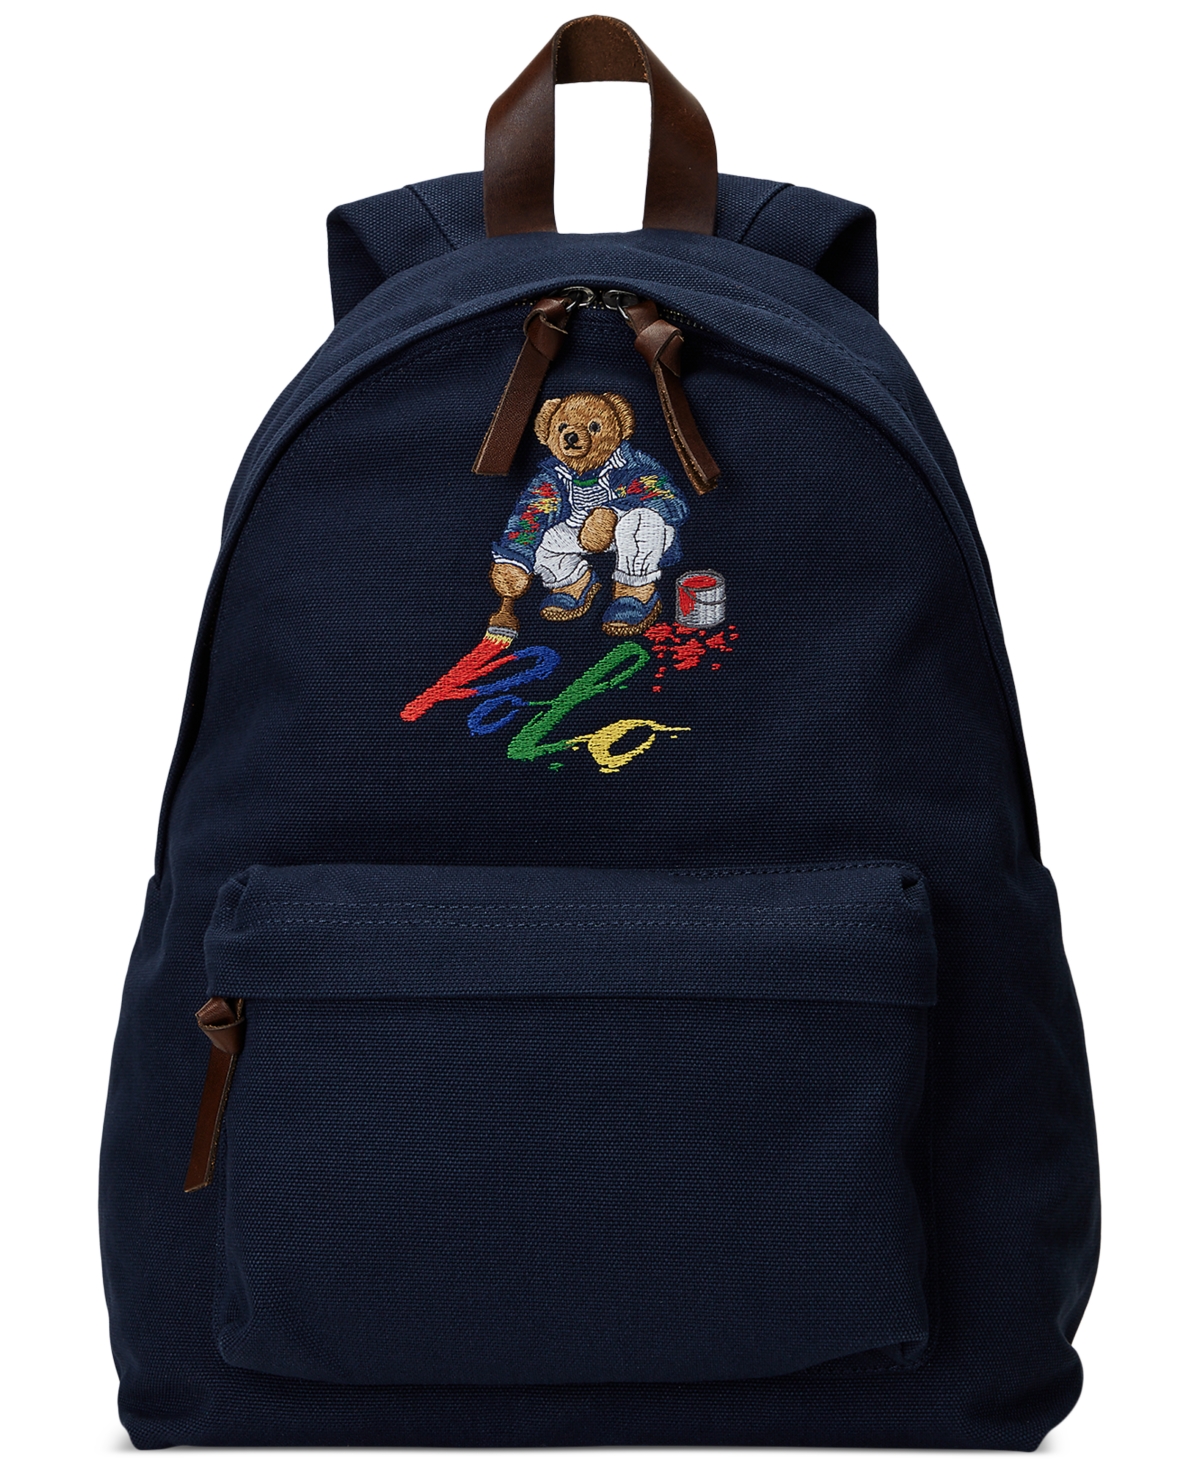 Men's Embroidered Canvas Backpack - Newport Navy